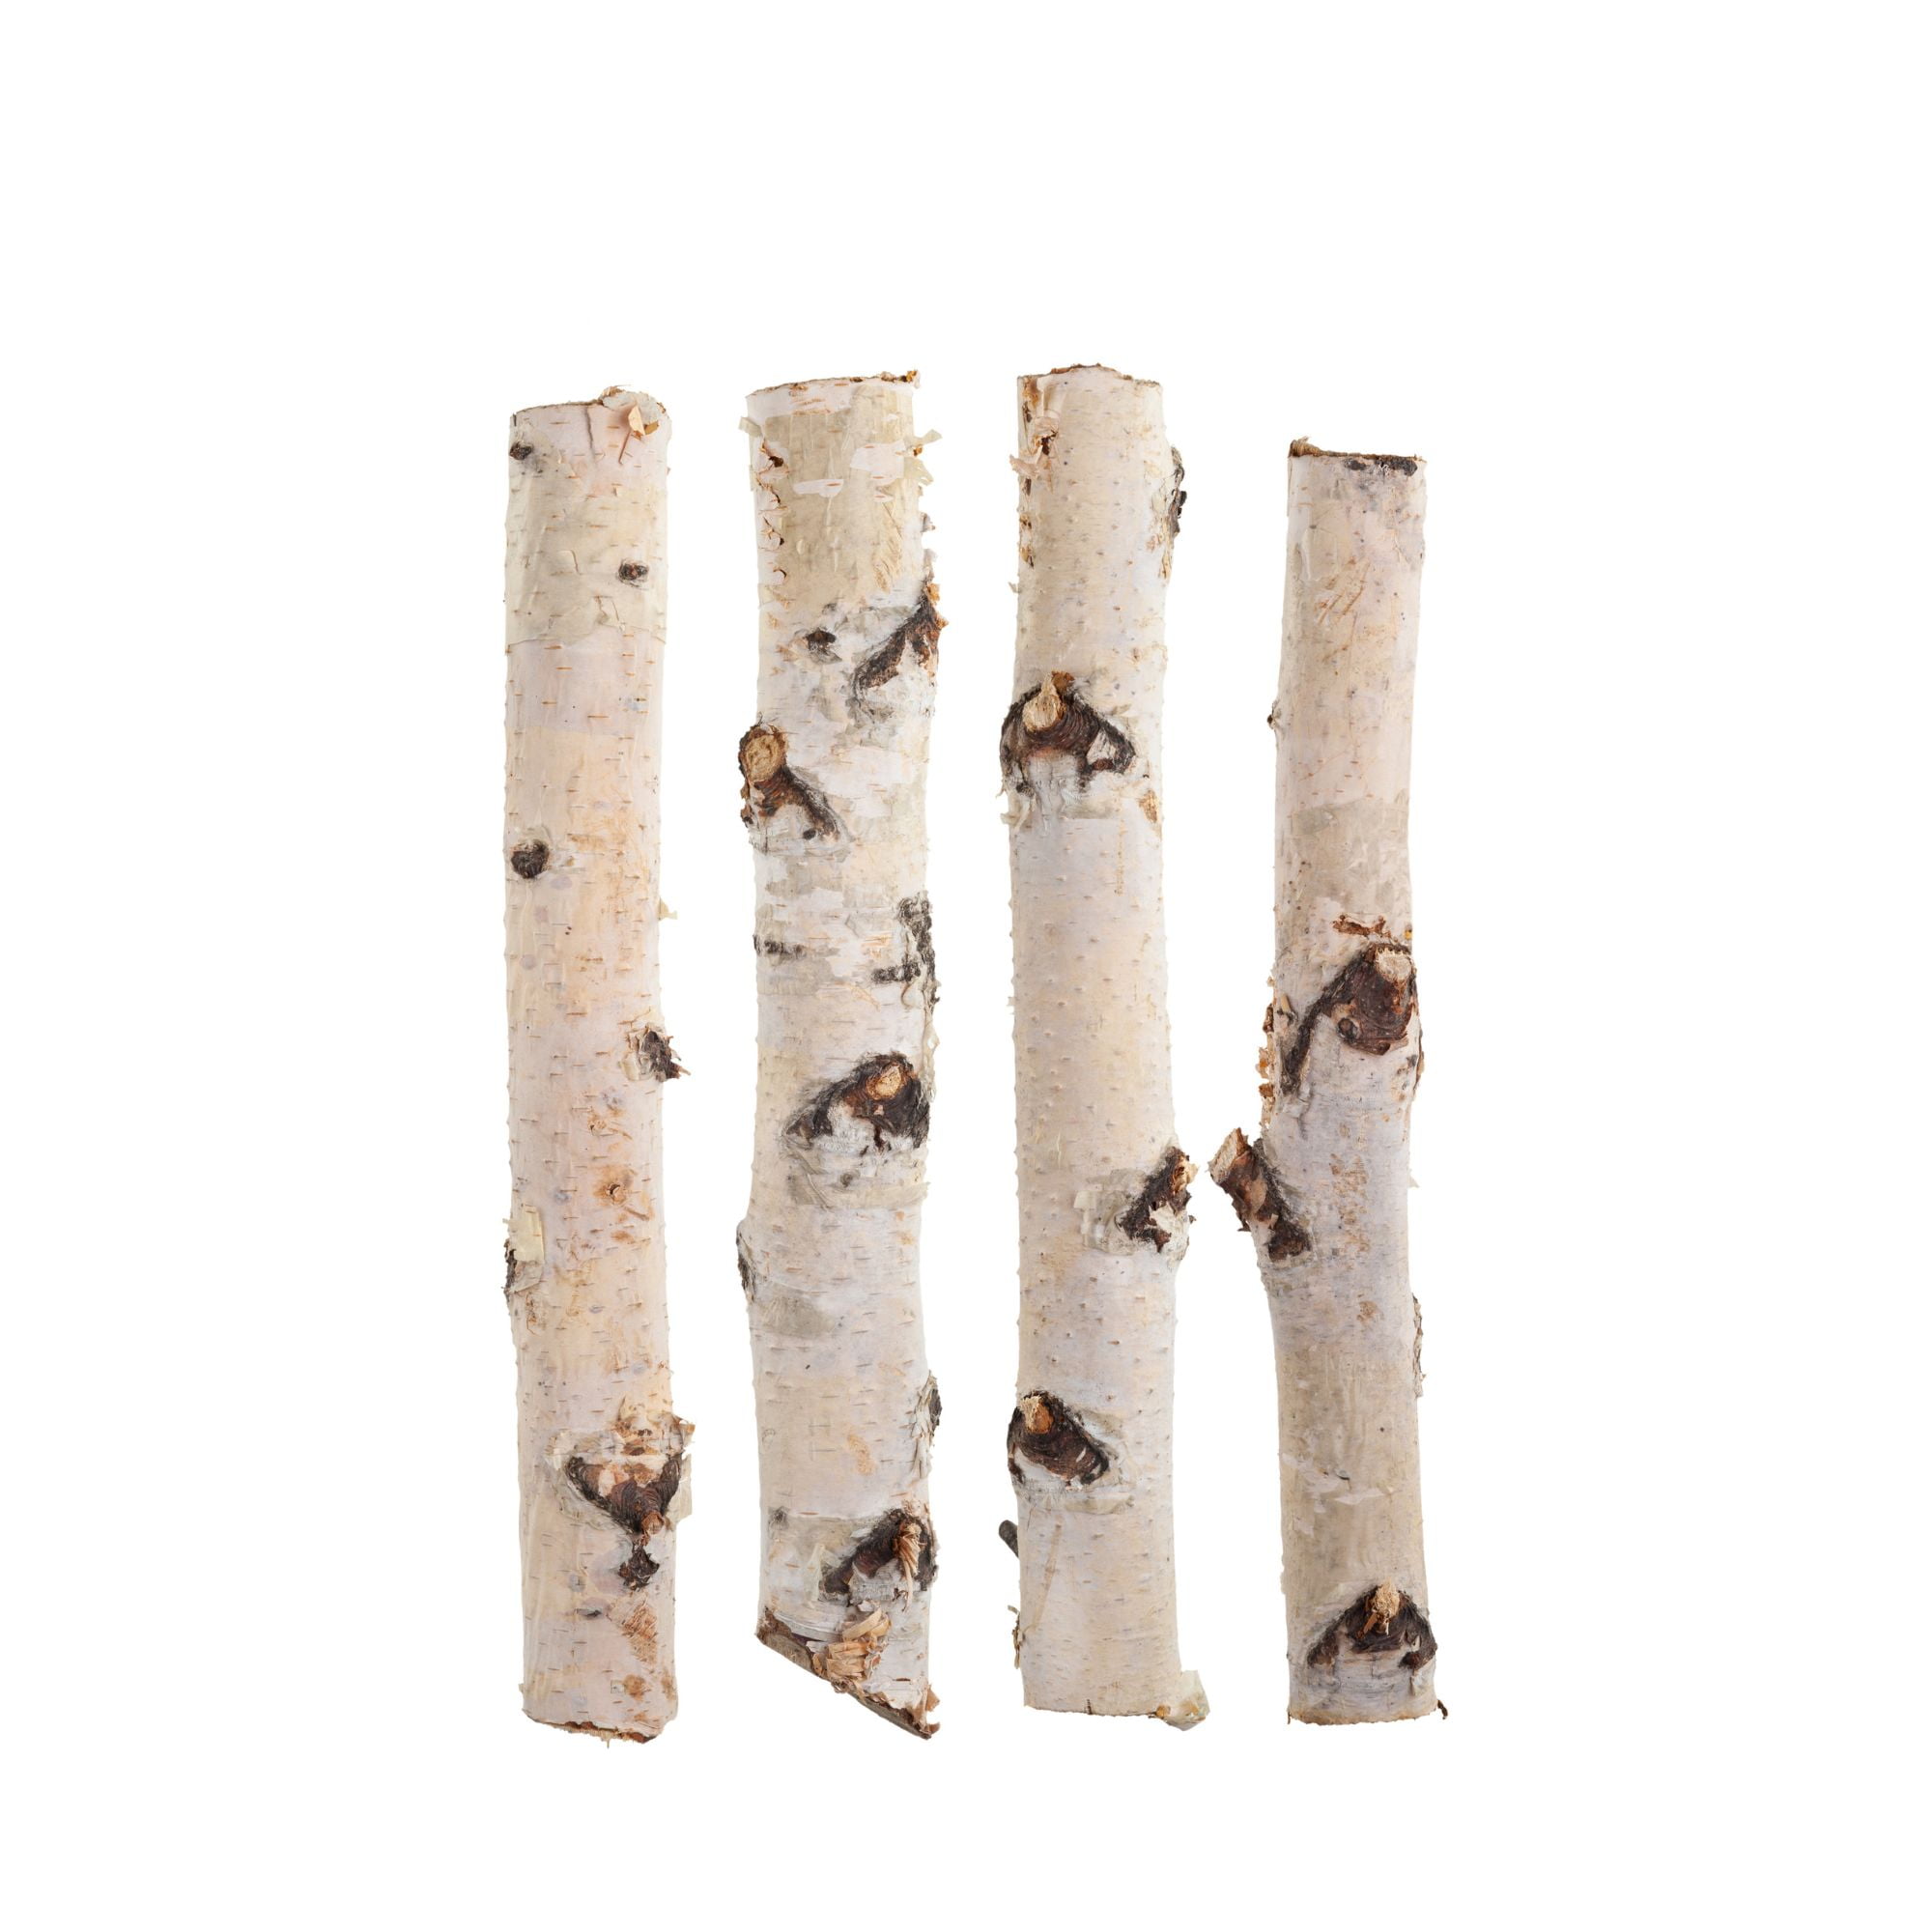 ProFlora Brown Birch Logs 16 - Pack of 3 Decoration 4ft 